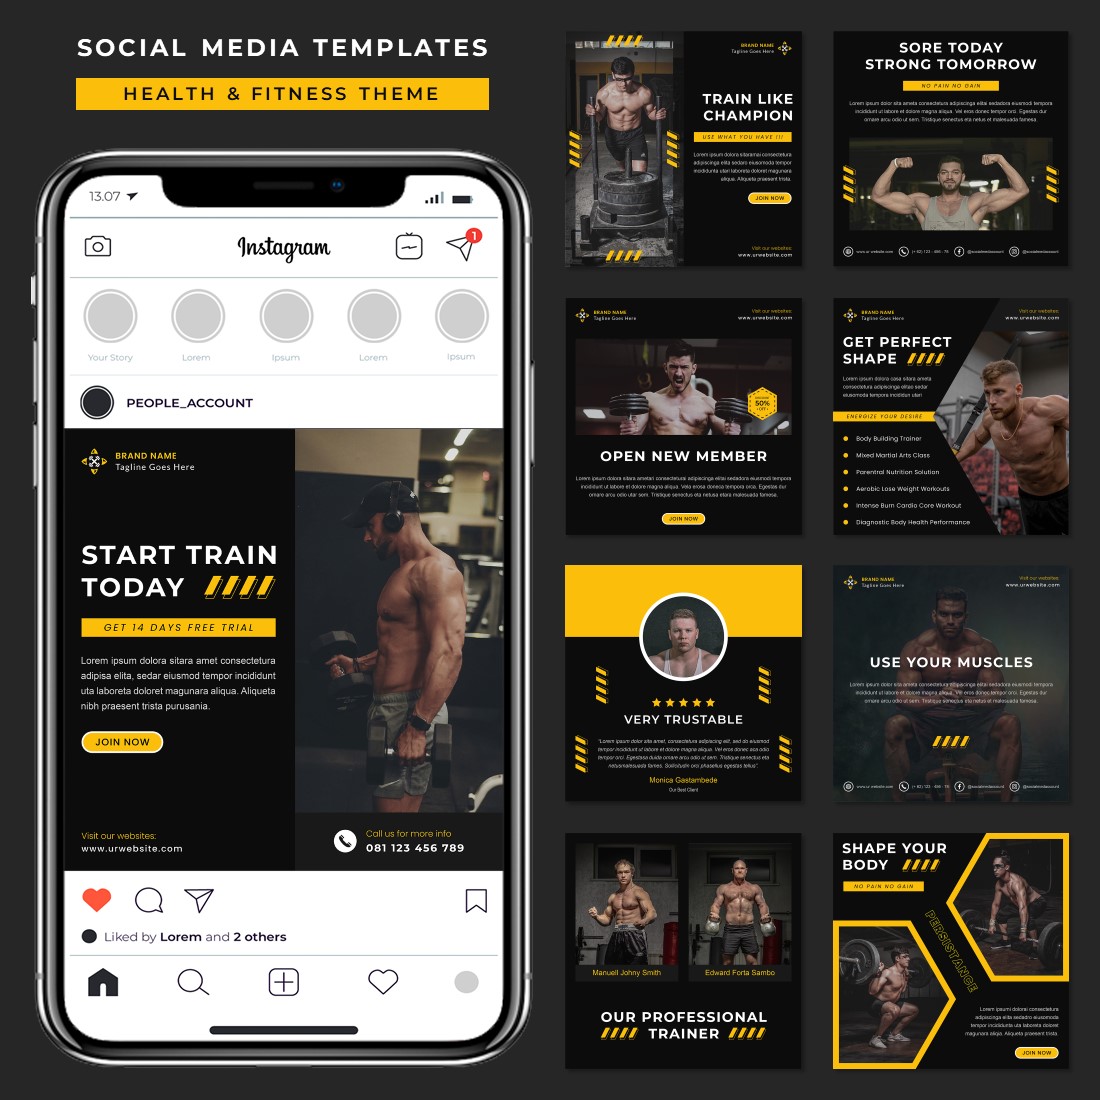 Health and Fitness Social Media Templates cover image.